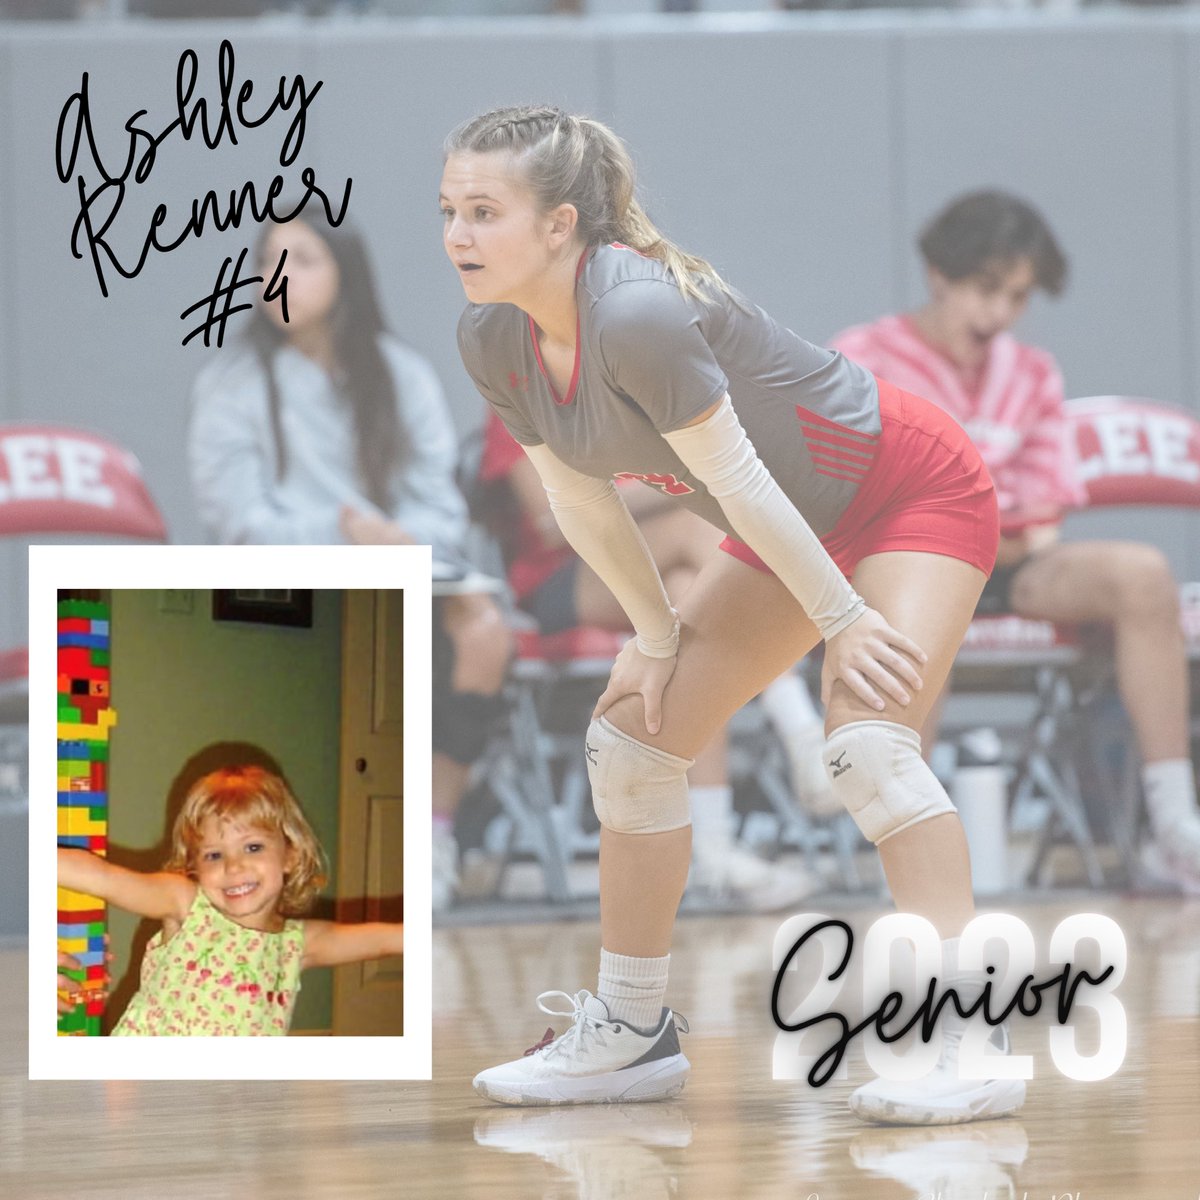 1st up on SENIOR DAY is DS, Ashley Renner! She attends ISA, is a 1st year letterman in volleyball, is top 6% in her class, and a member of the National Honor Society! We ♥️ you Ashley! #leevb #govols #seniorday @LEEPTSA1 @leeneisd @leevolsbooster @ISA_Globies